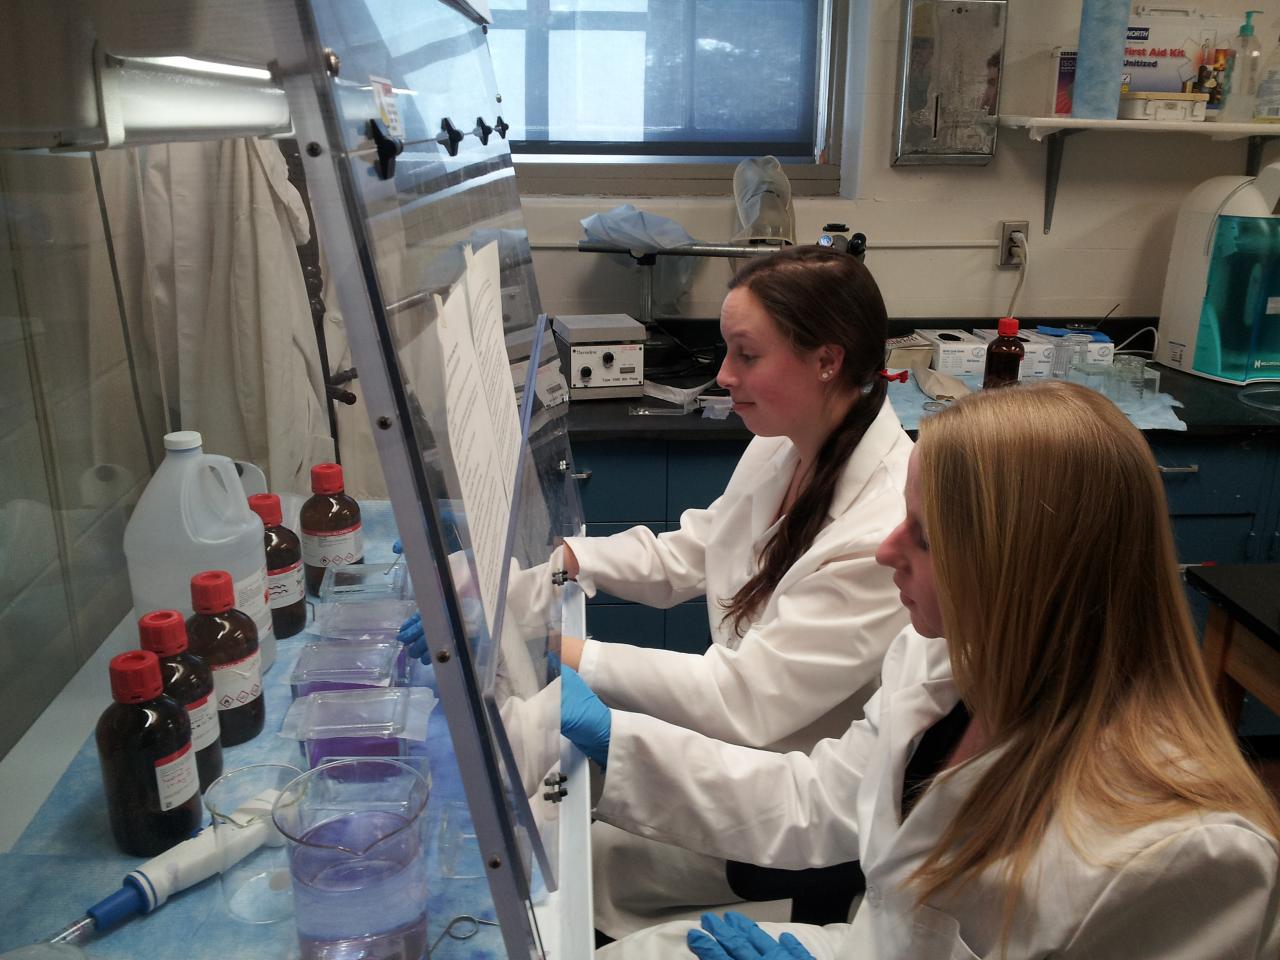 Two female students working on research